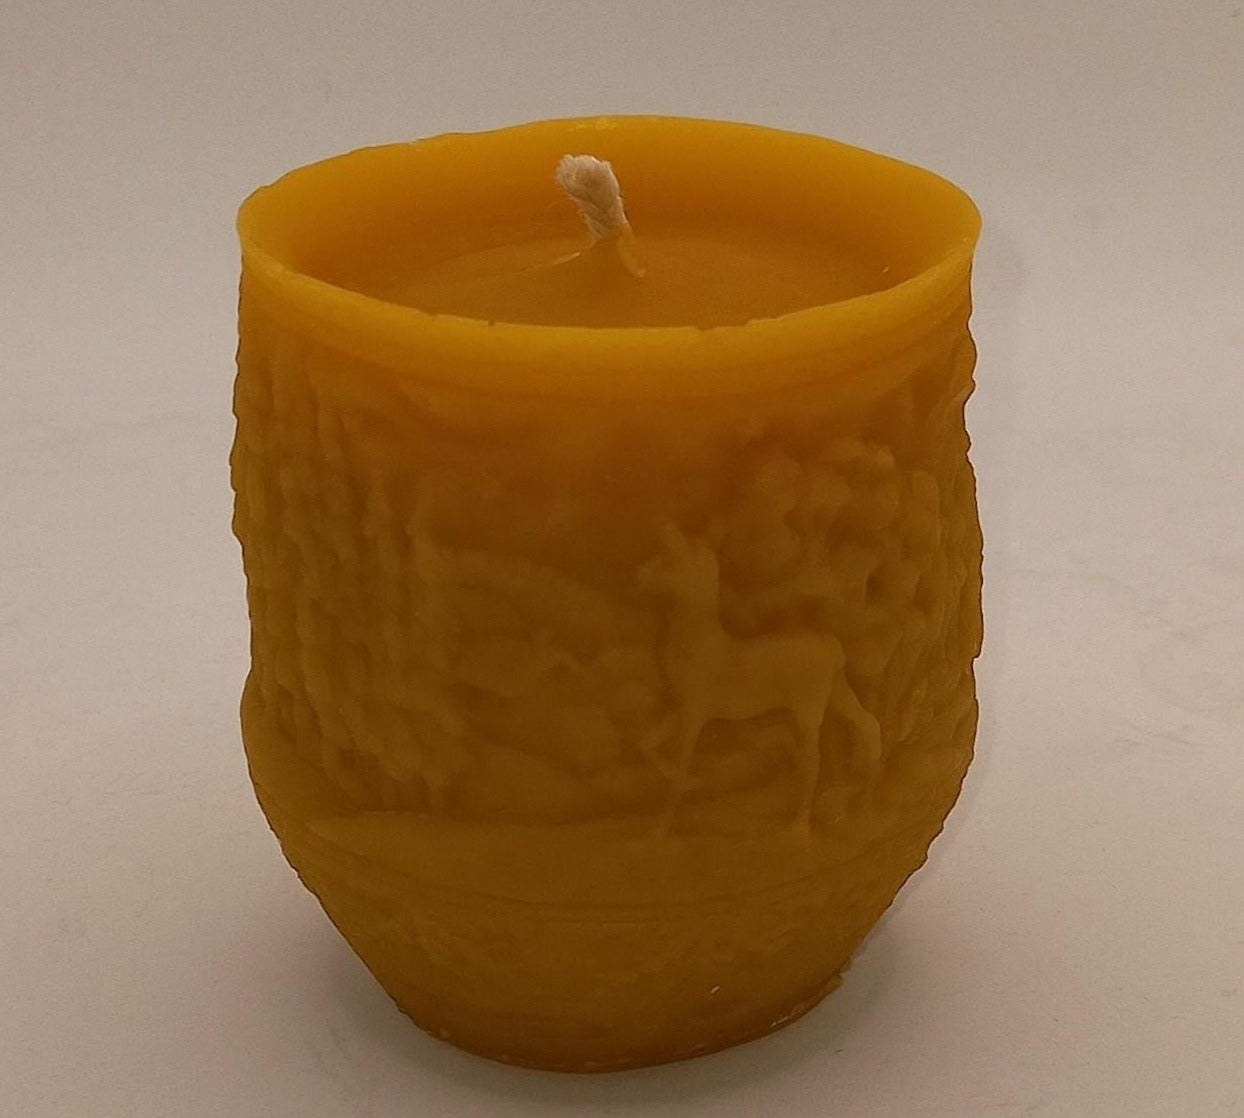 Le Paysage Hivernal Beeswax Candle by Pure Abeille, 1